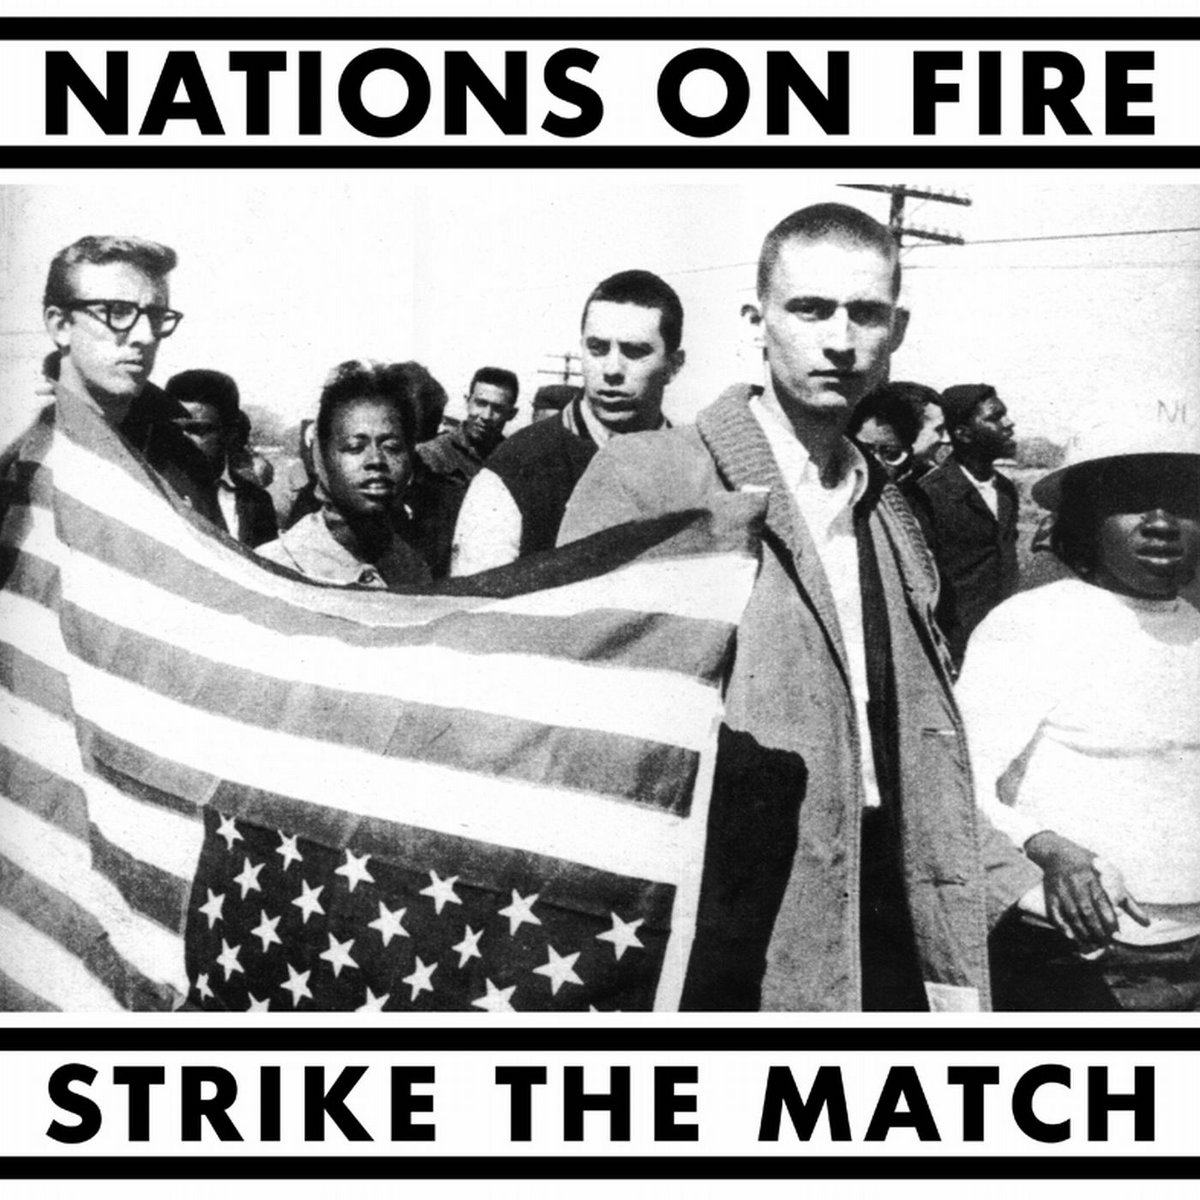 NATIONS OF FIRE - Strike the match